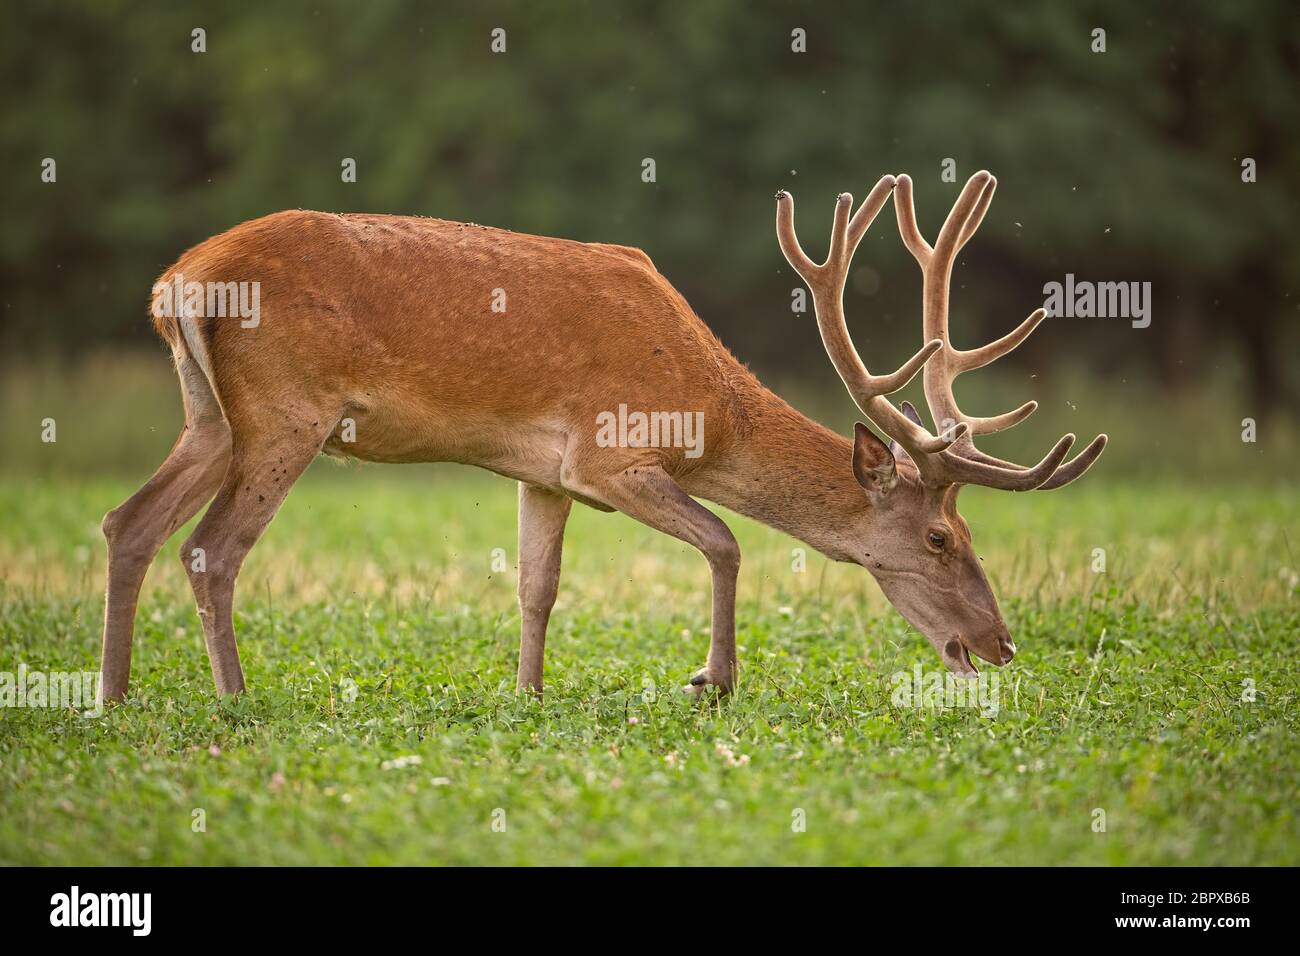 Red Deer, Cervus elaphus, stag with growing antlers covered in velvet. Wild animal in grass land with green blurred background during a fresh spring. Stock Photo